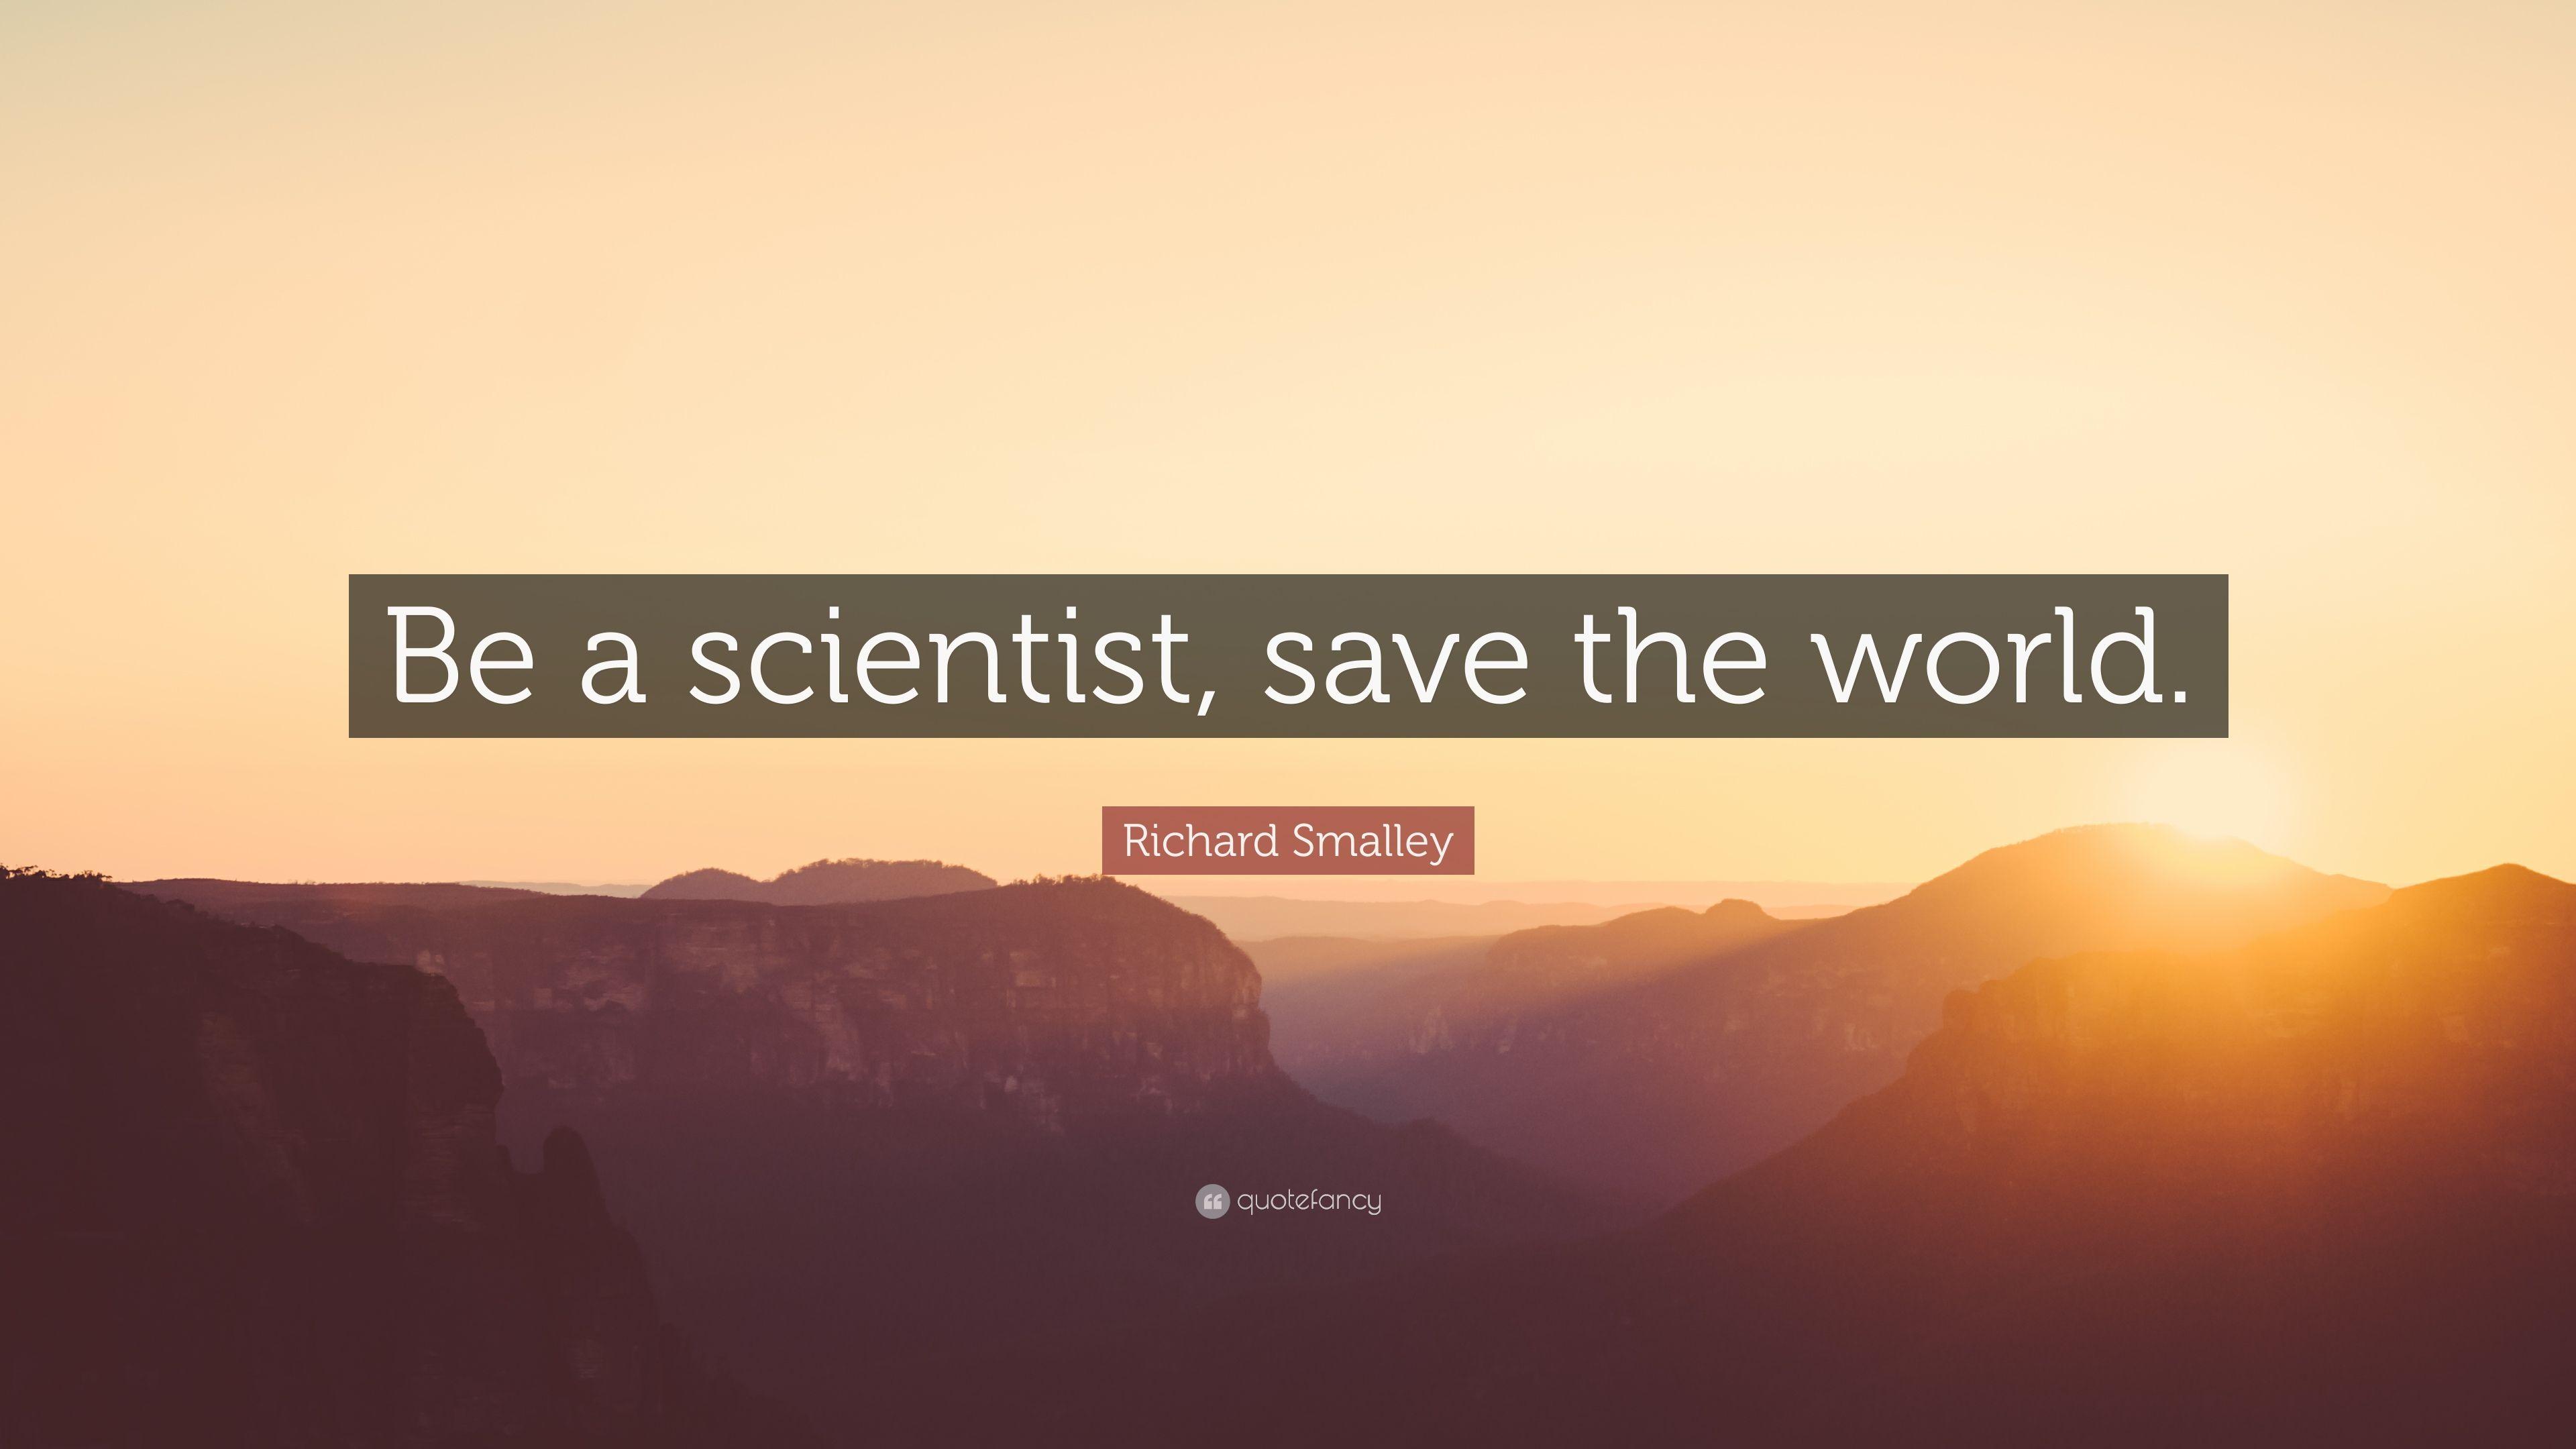 Richard Smalley Quote: “Be a scientist, save the world.” 9